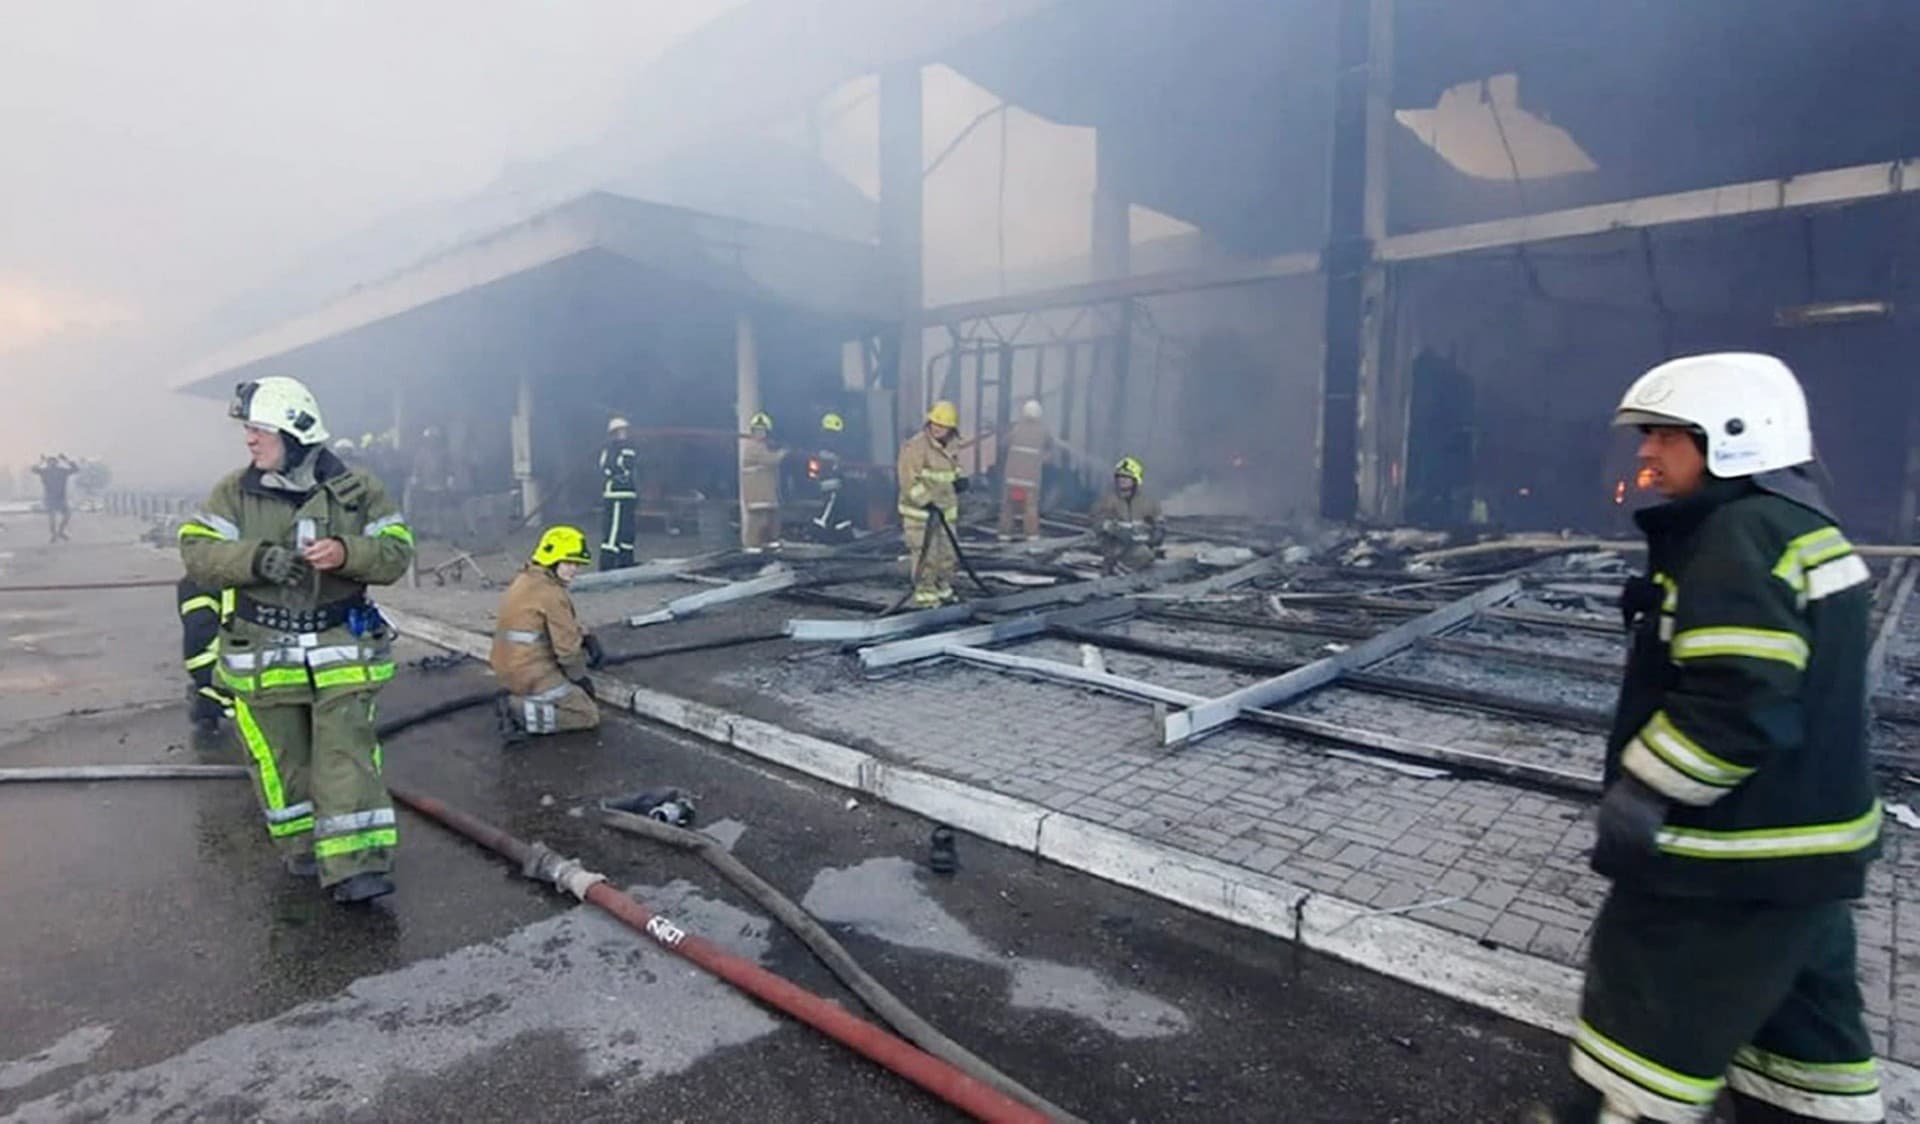 firefighters work to extinguish a fire at a shopping center burned after a rocket attack in Kremenchuk